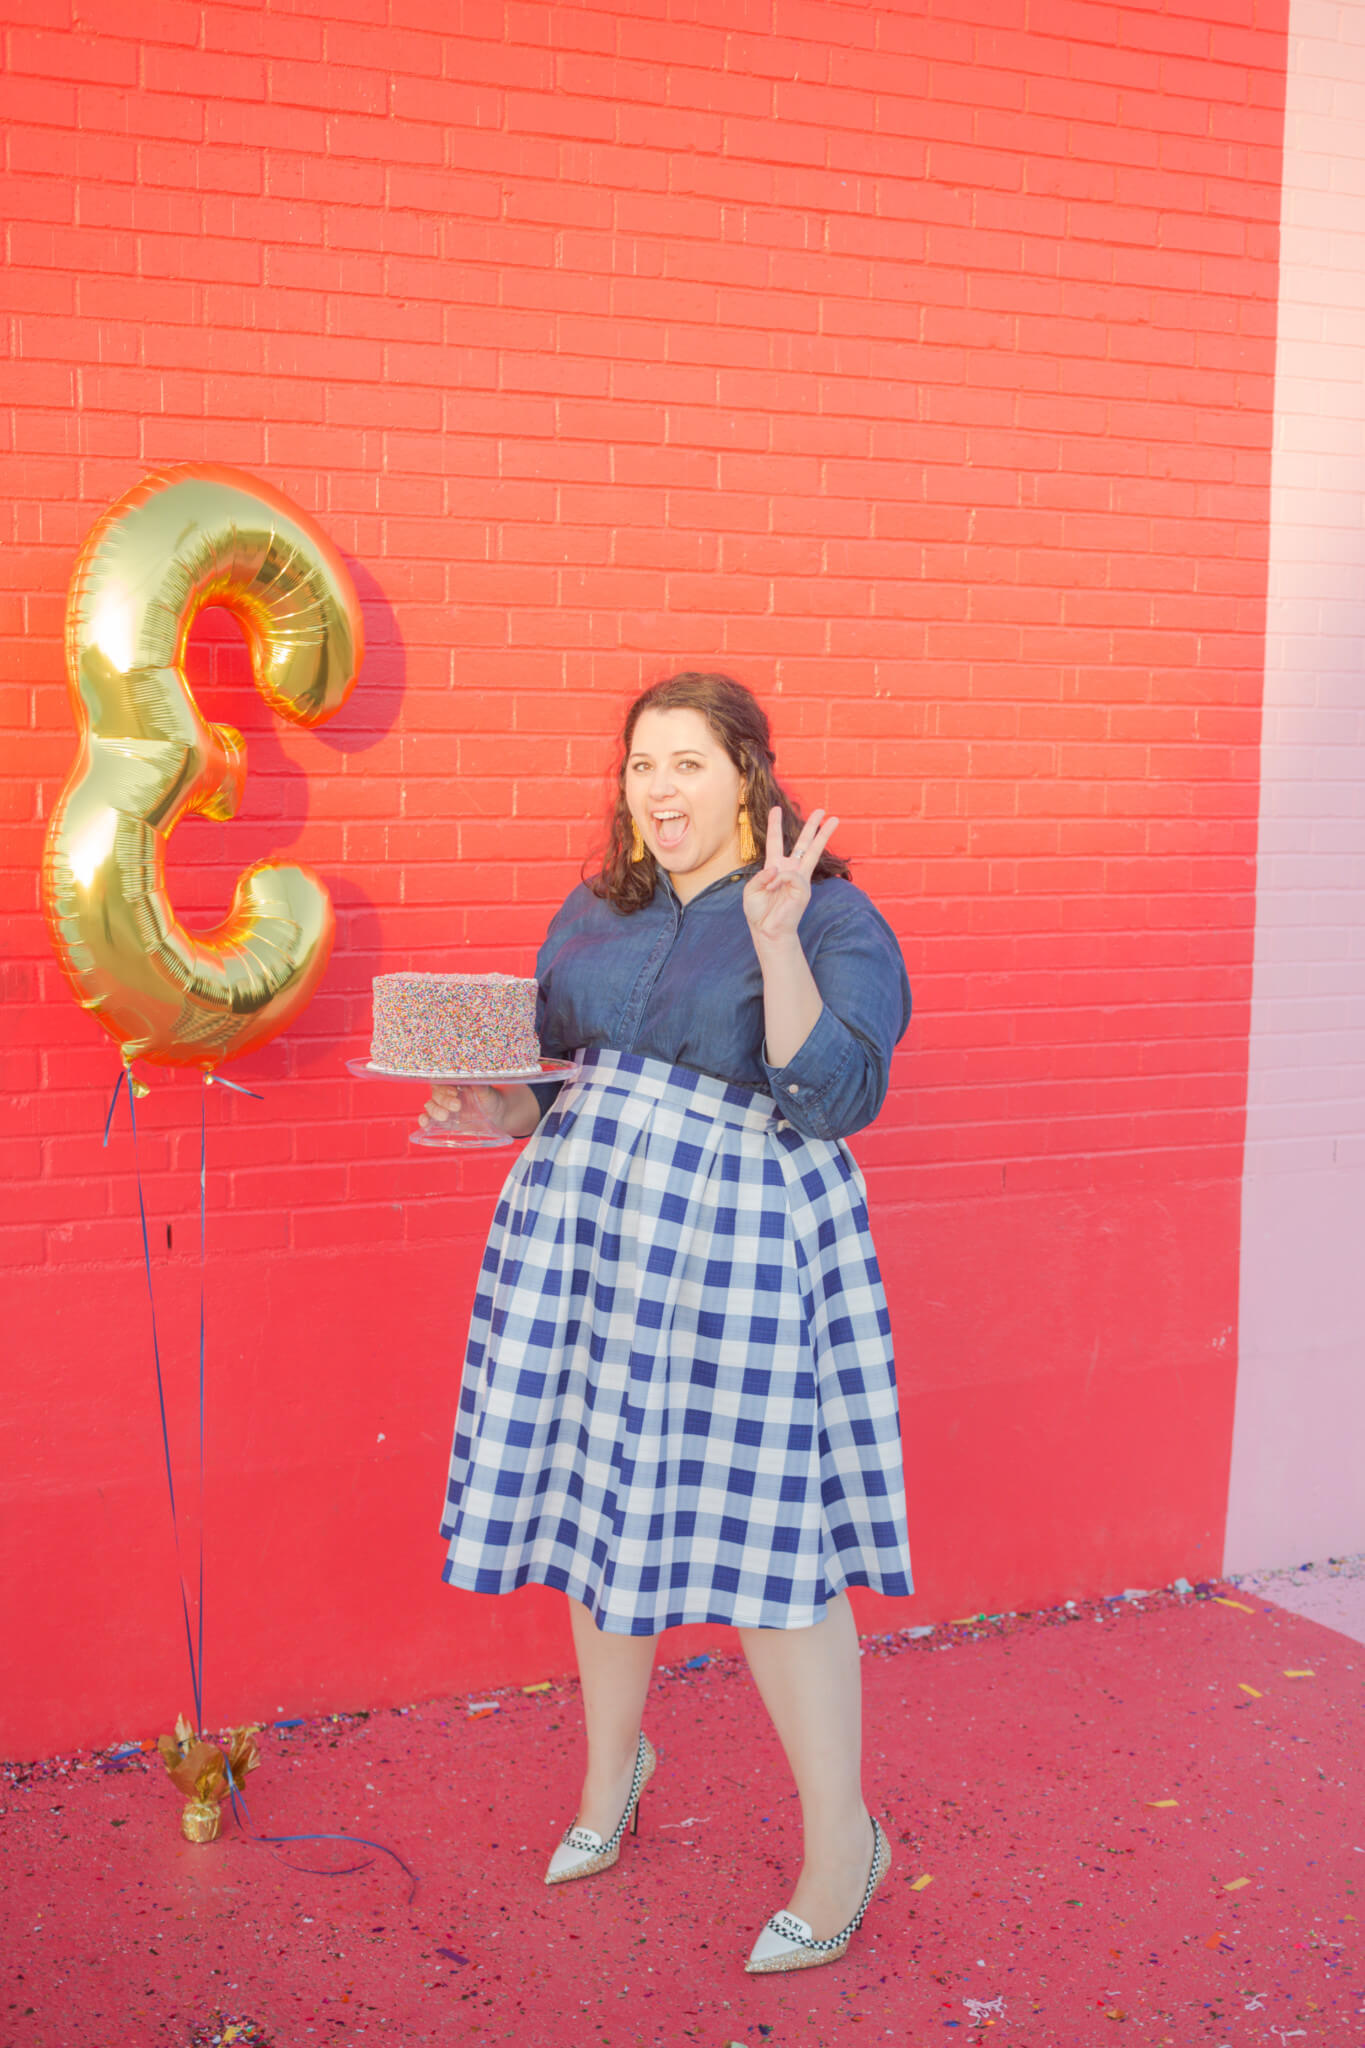 SGSB is 3 years old! I'm celebrating in an Eloquii gigham skirt, chambray top and Lisi Lerch tassel earrings. | Something Gold, Something Blue a curvy fashion blog by Emily Bastedo